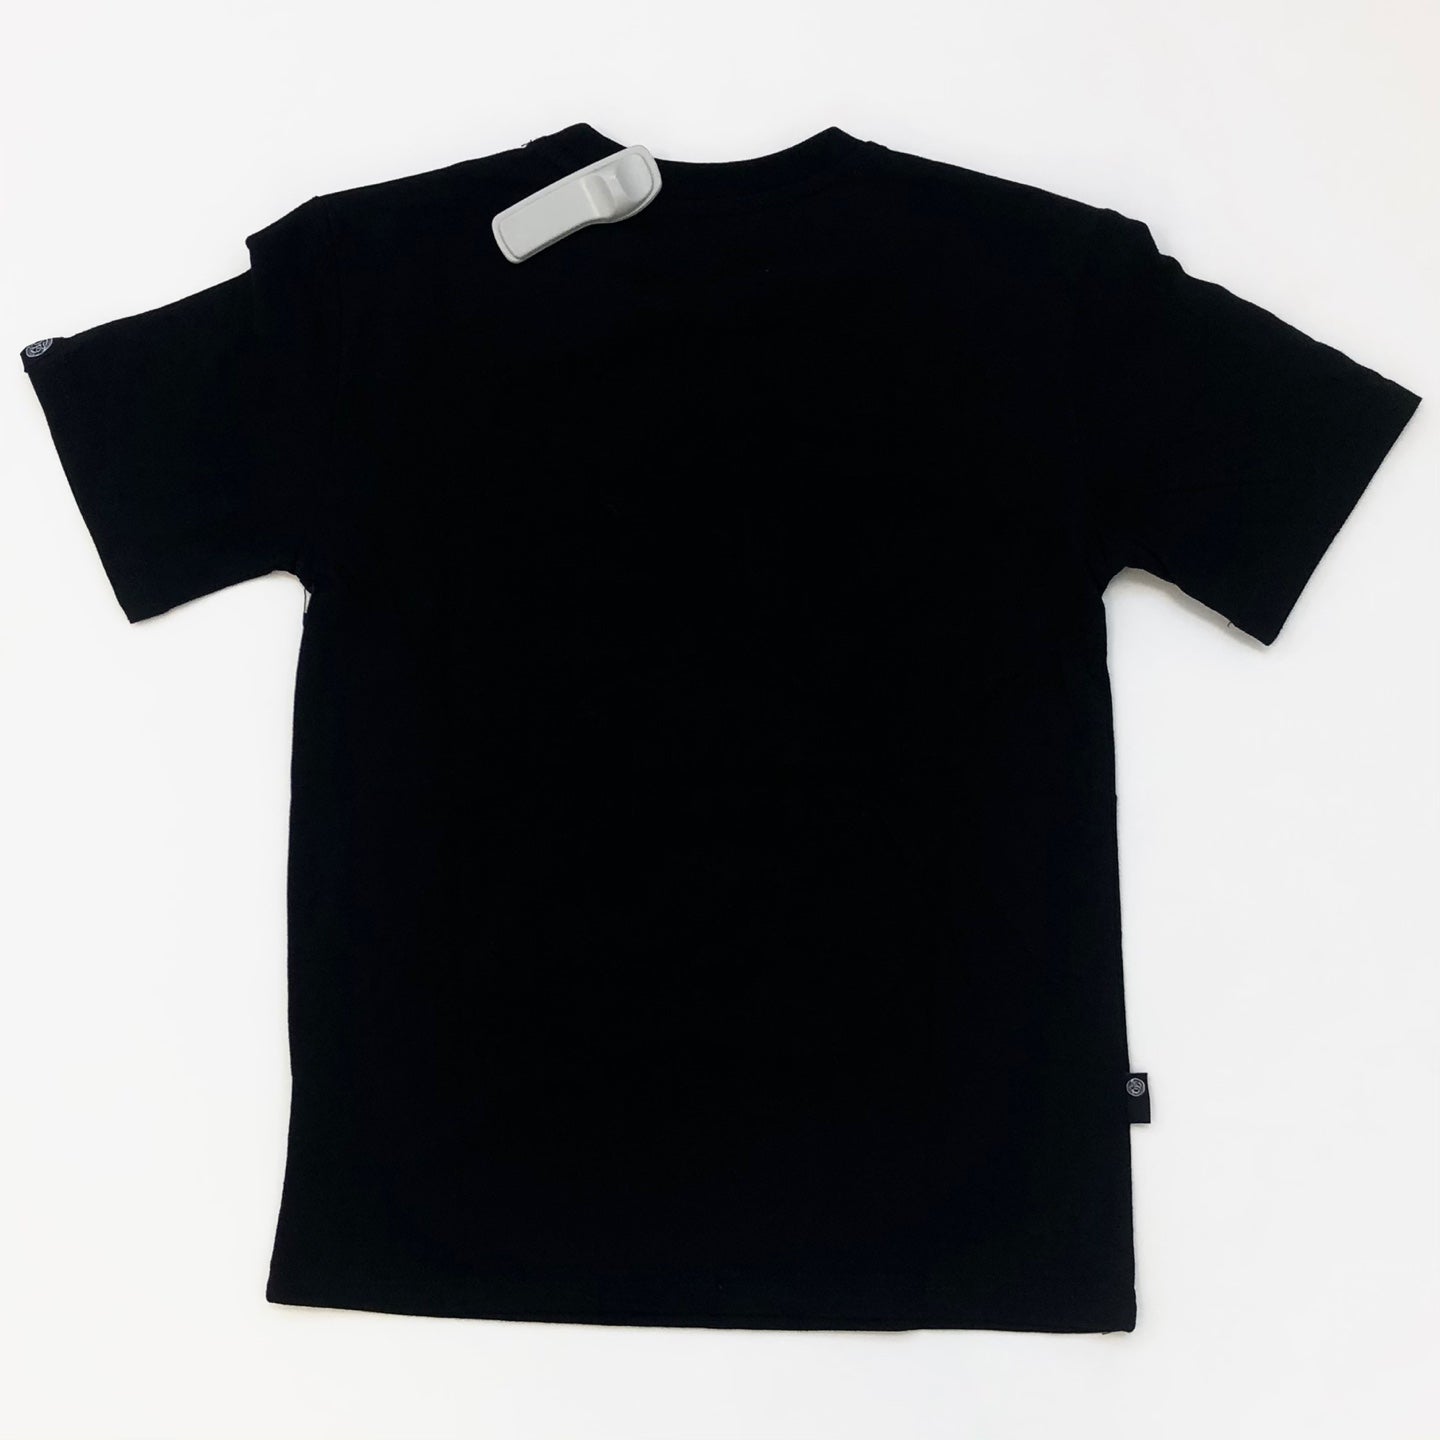 Self Made Teddy Kid's Graphic T-Shirt - Black/Gold